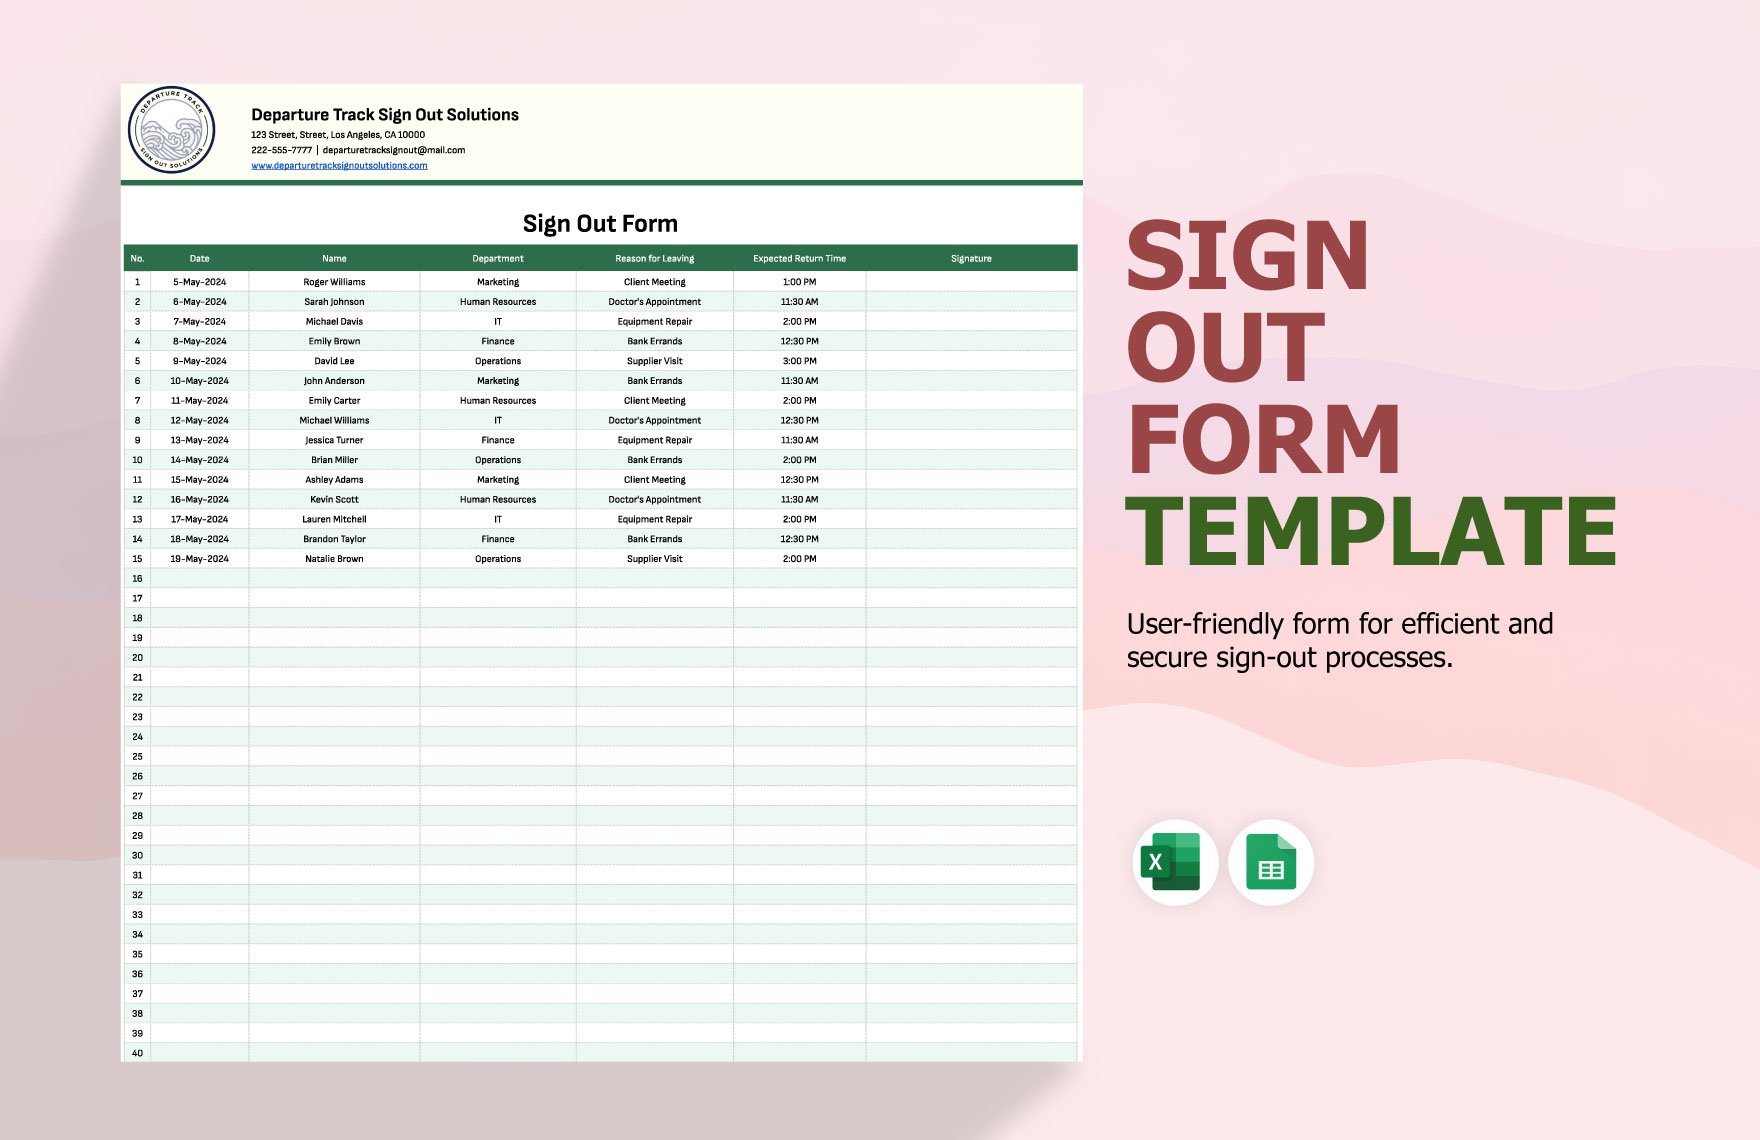 Sign Out Form Template in Excel, Google Sheets